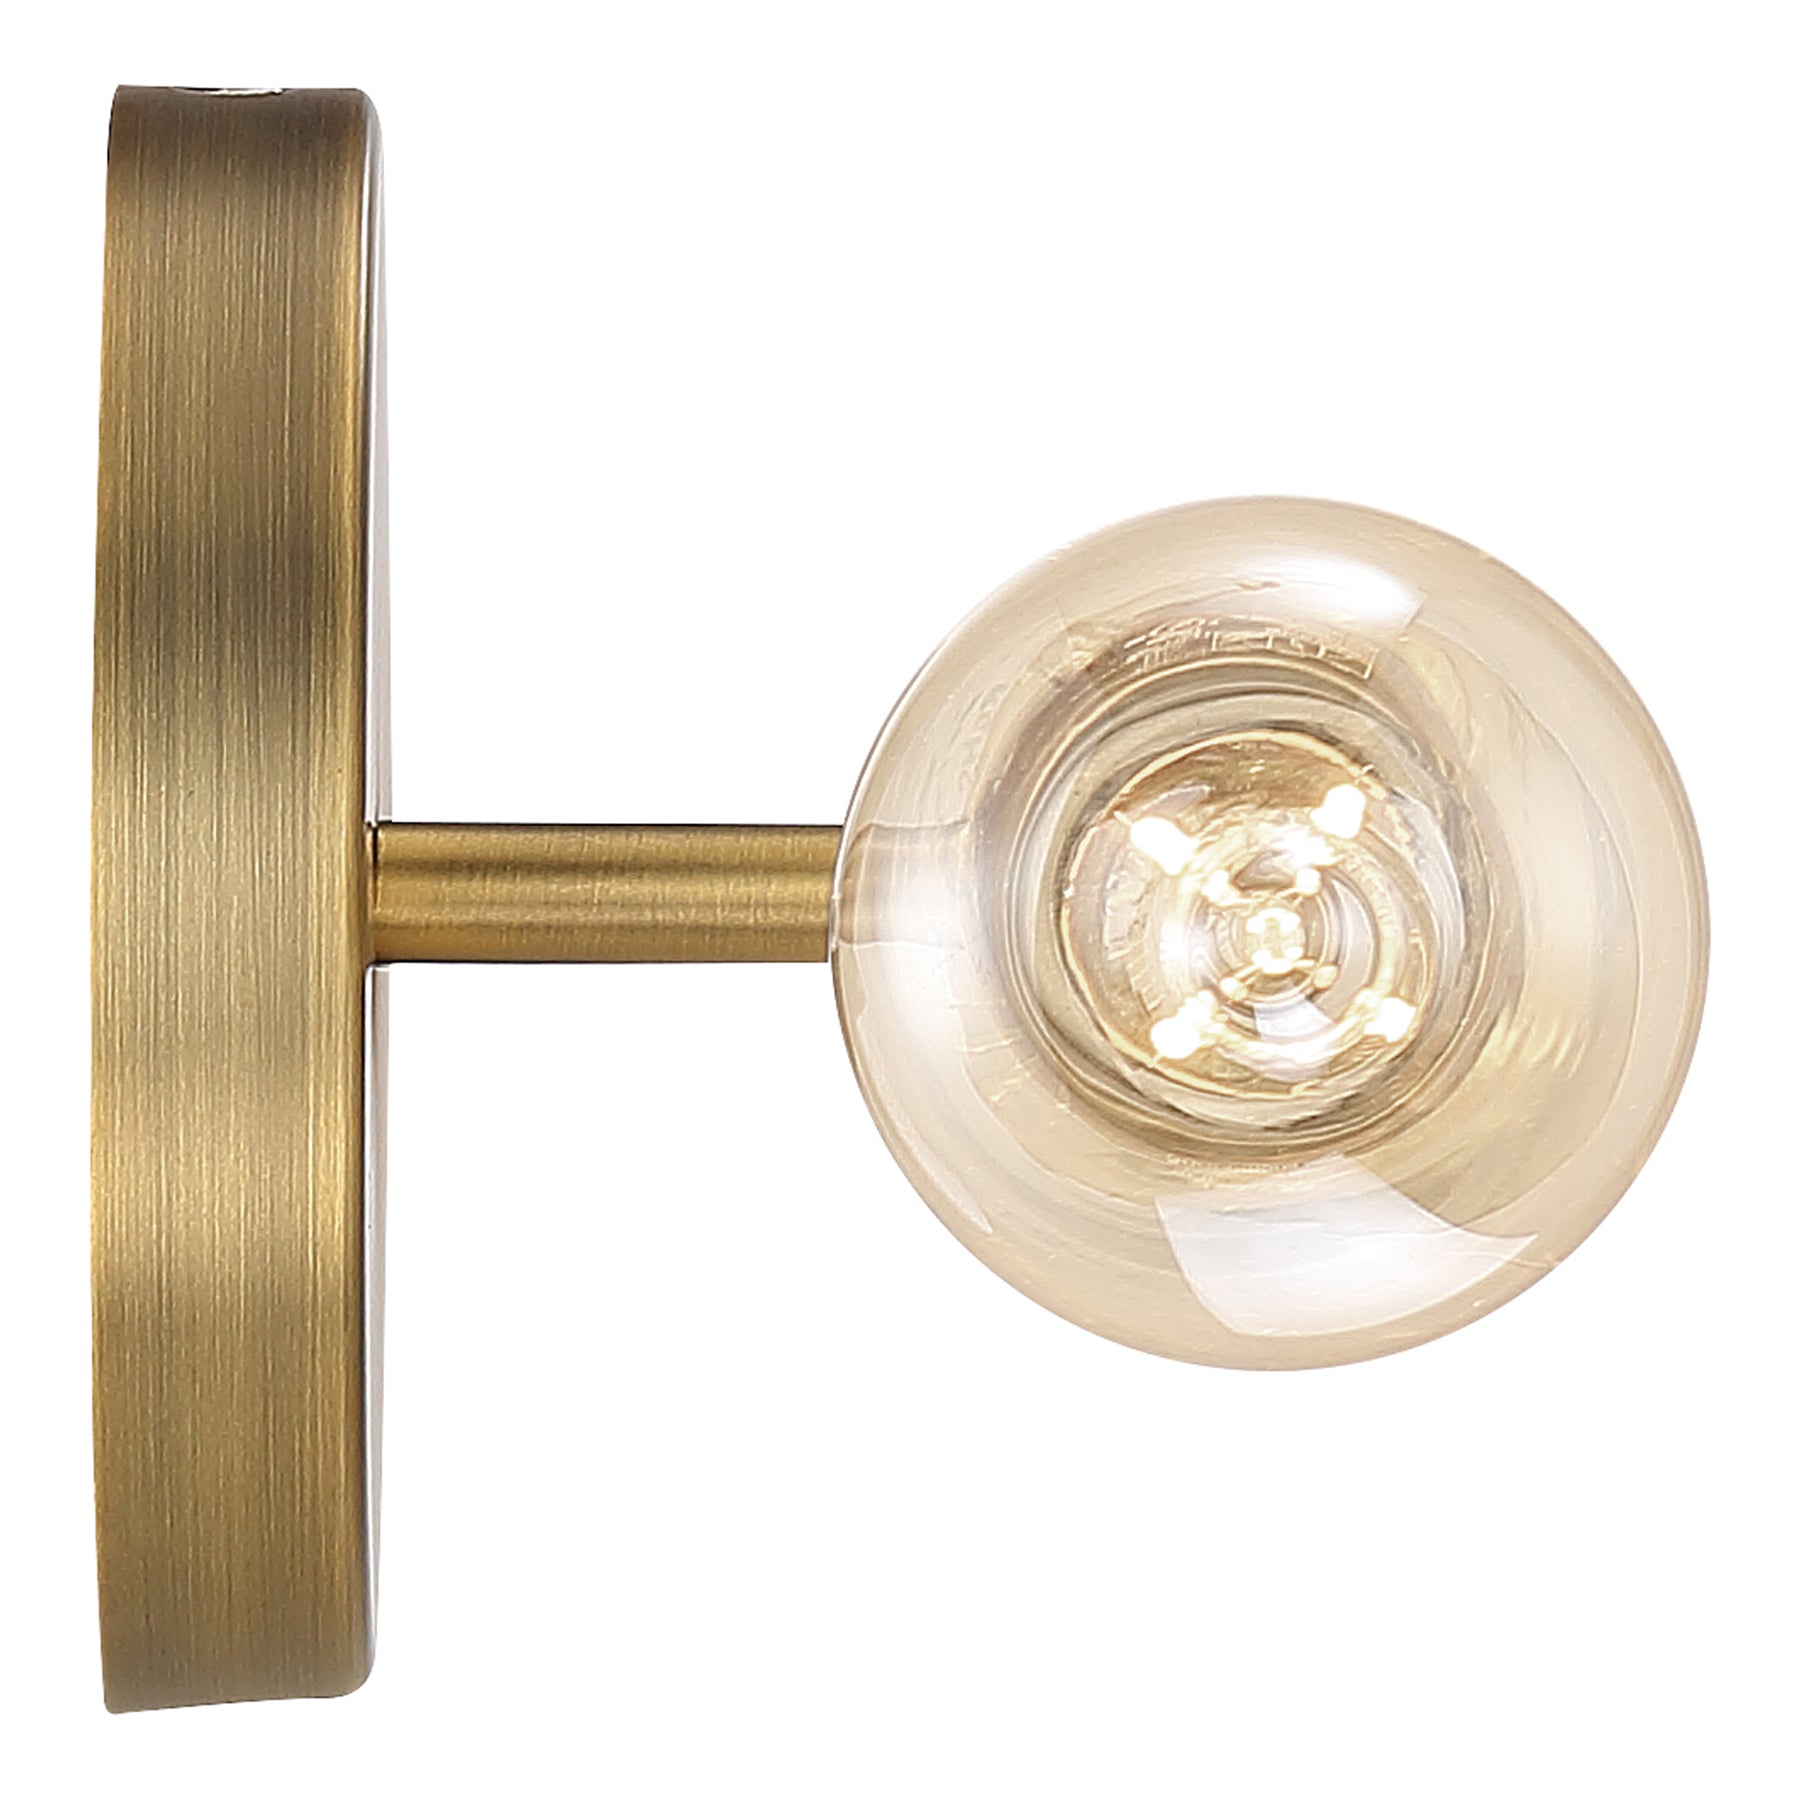  View details for Iconic 2 Light 5in. Wall Sconce (Antique Brushed Brass) Iconic 2 Light 5in. Wall Sconce (Antique Brushed Brass)